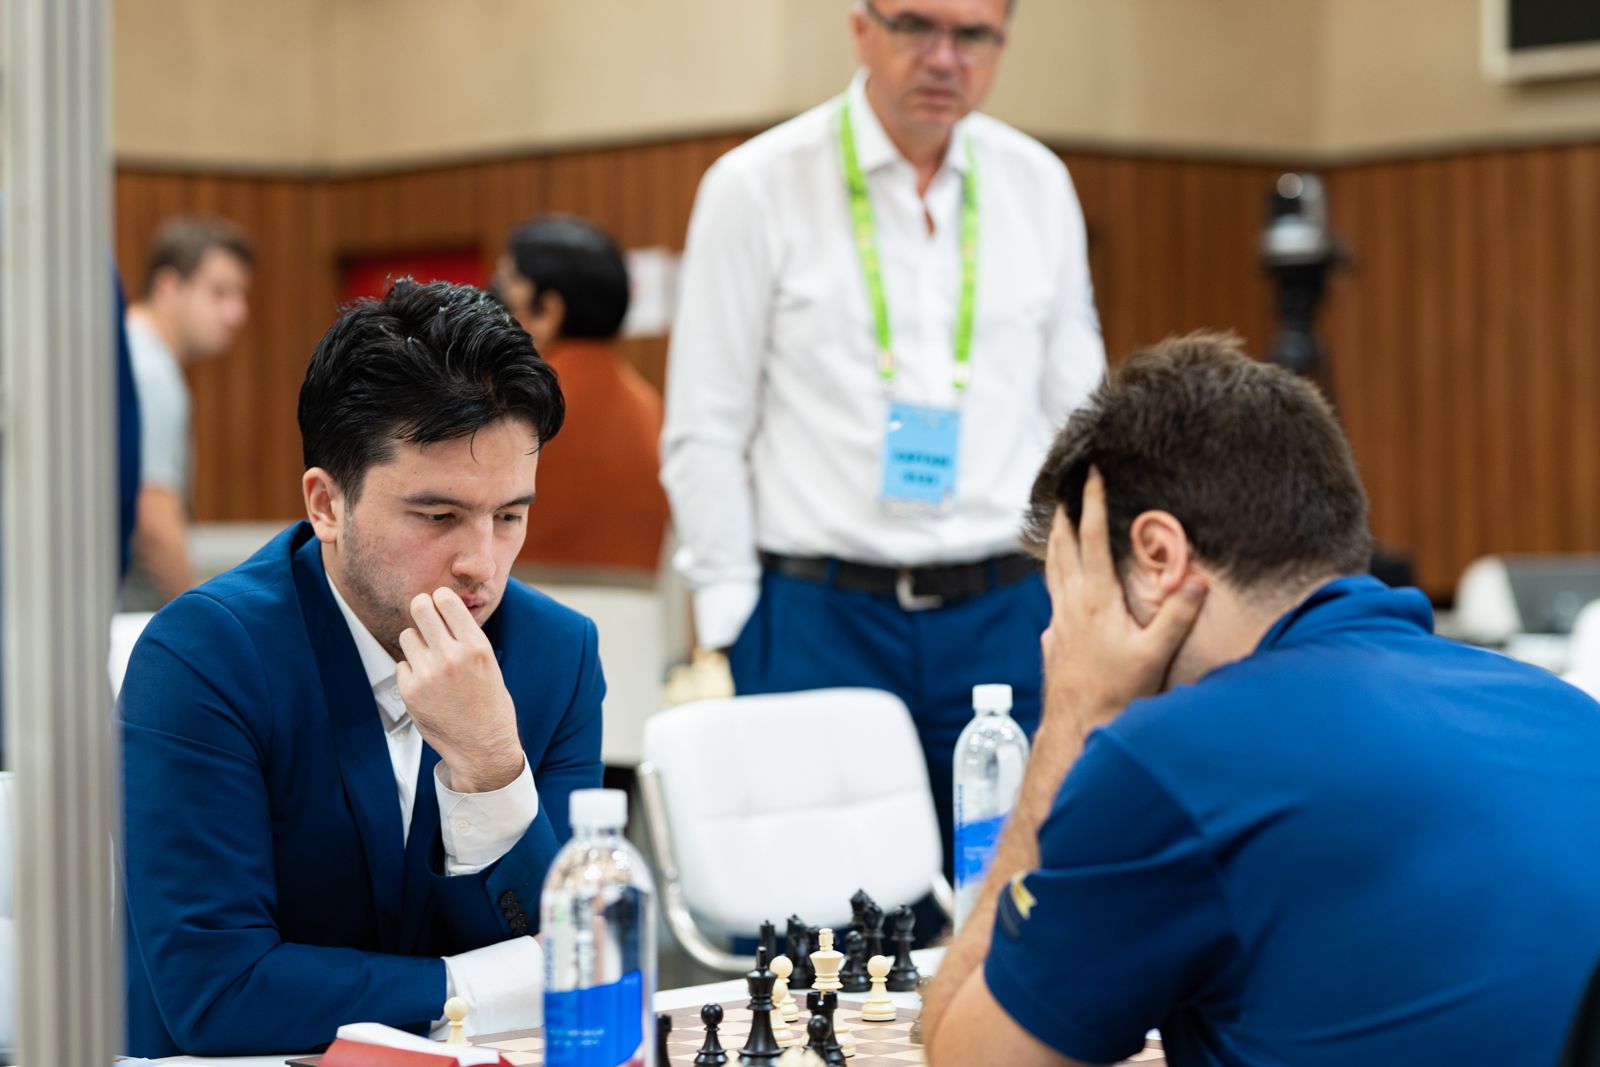 Rounds 01-, FIDE Chess Olympiad 2022, Day 1, USA vs Angola